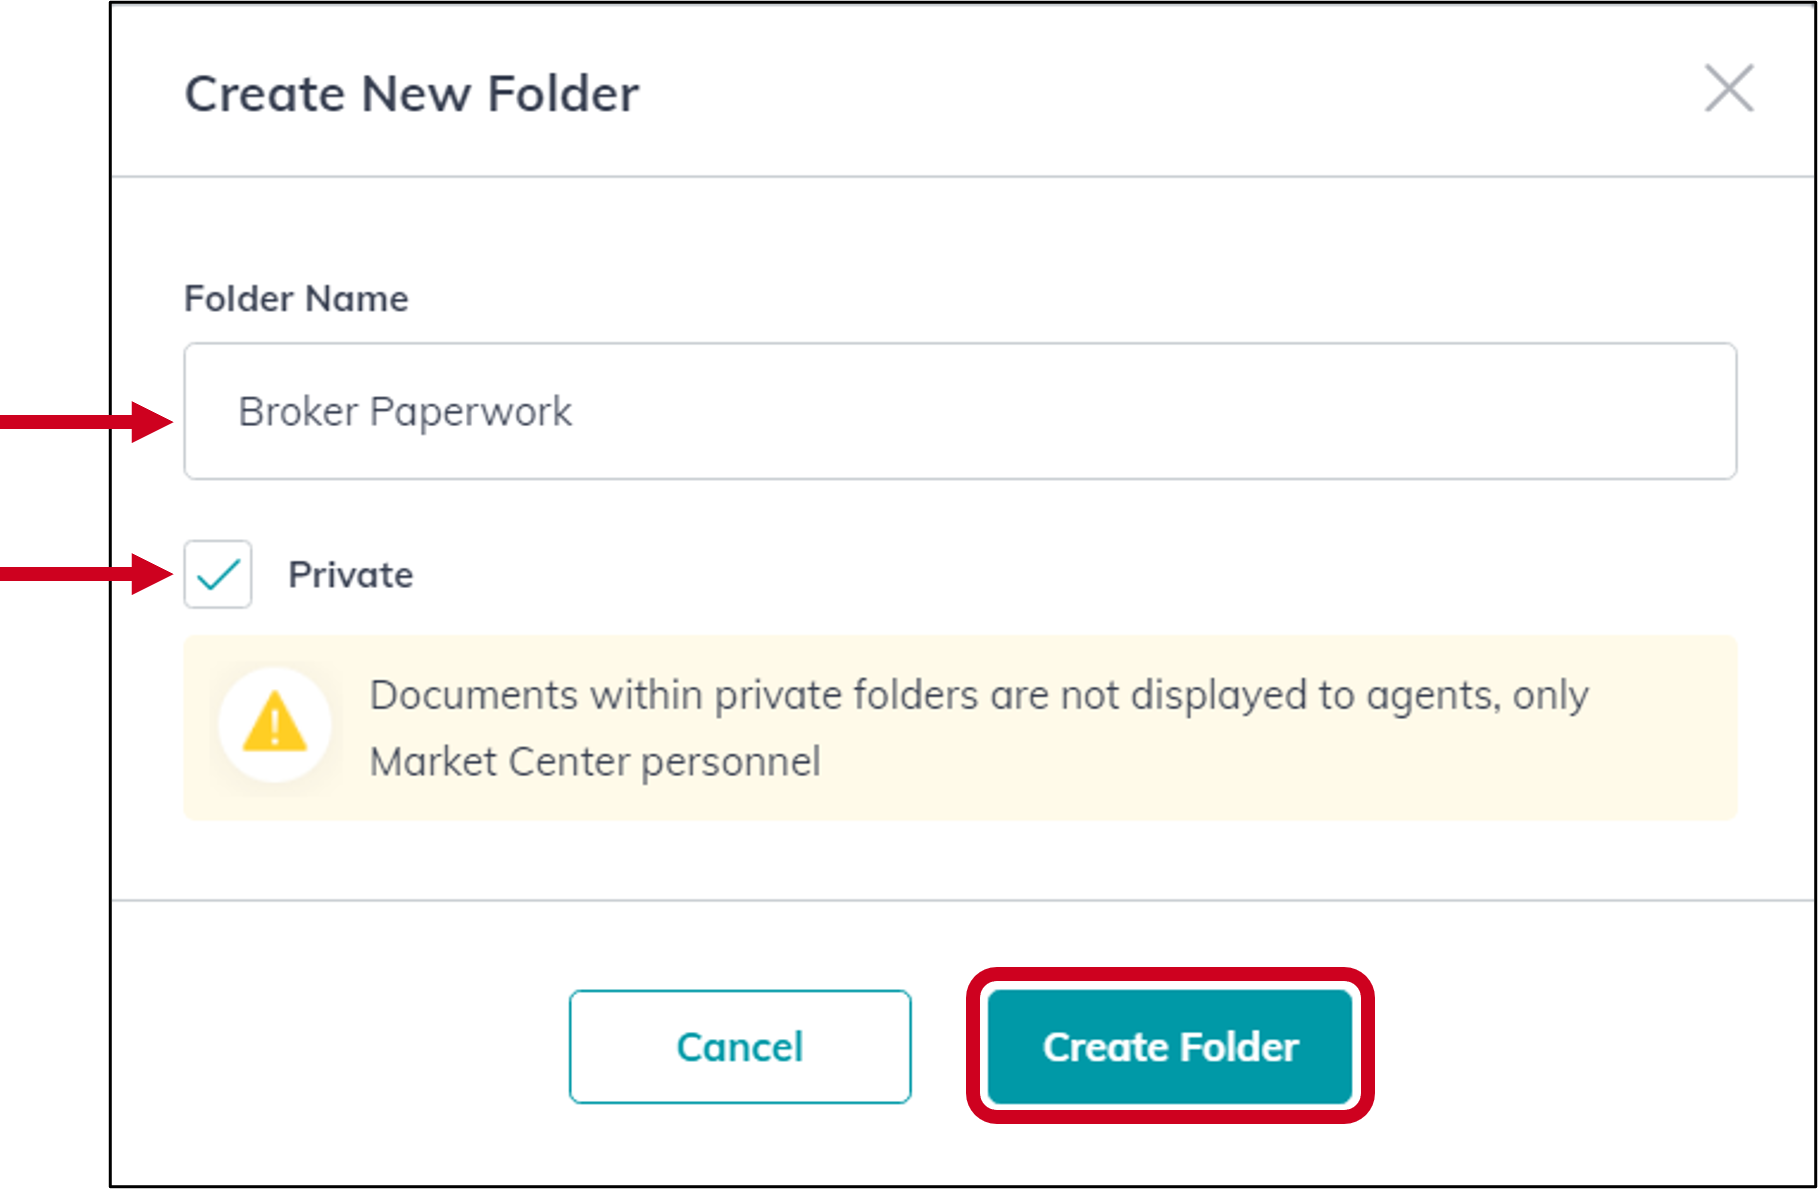 compliance_create_new_folder_form.png